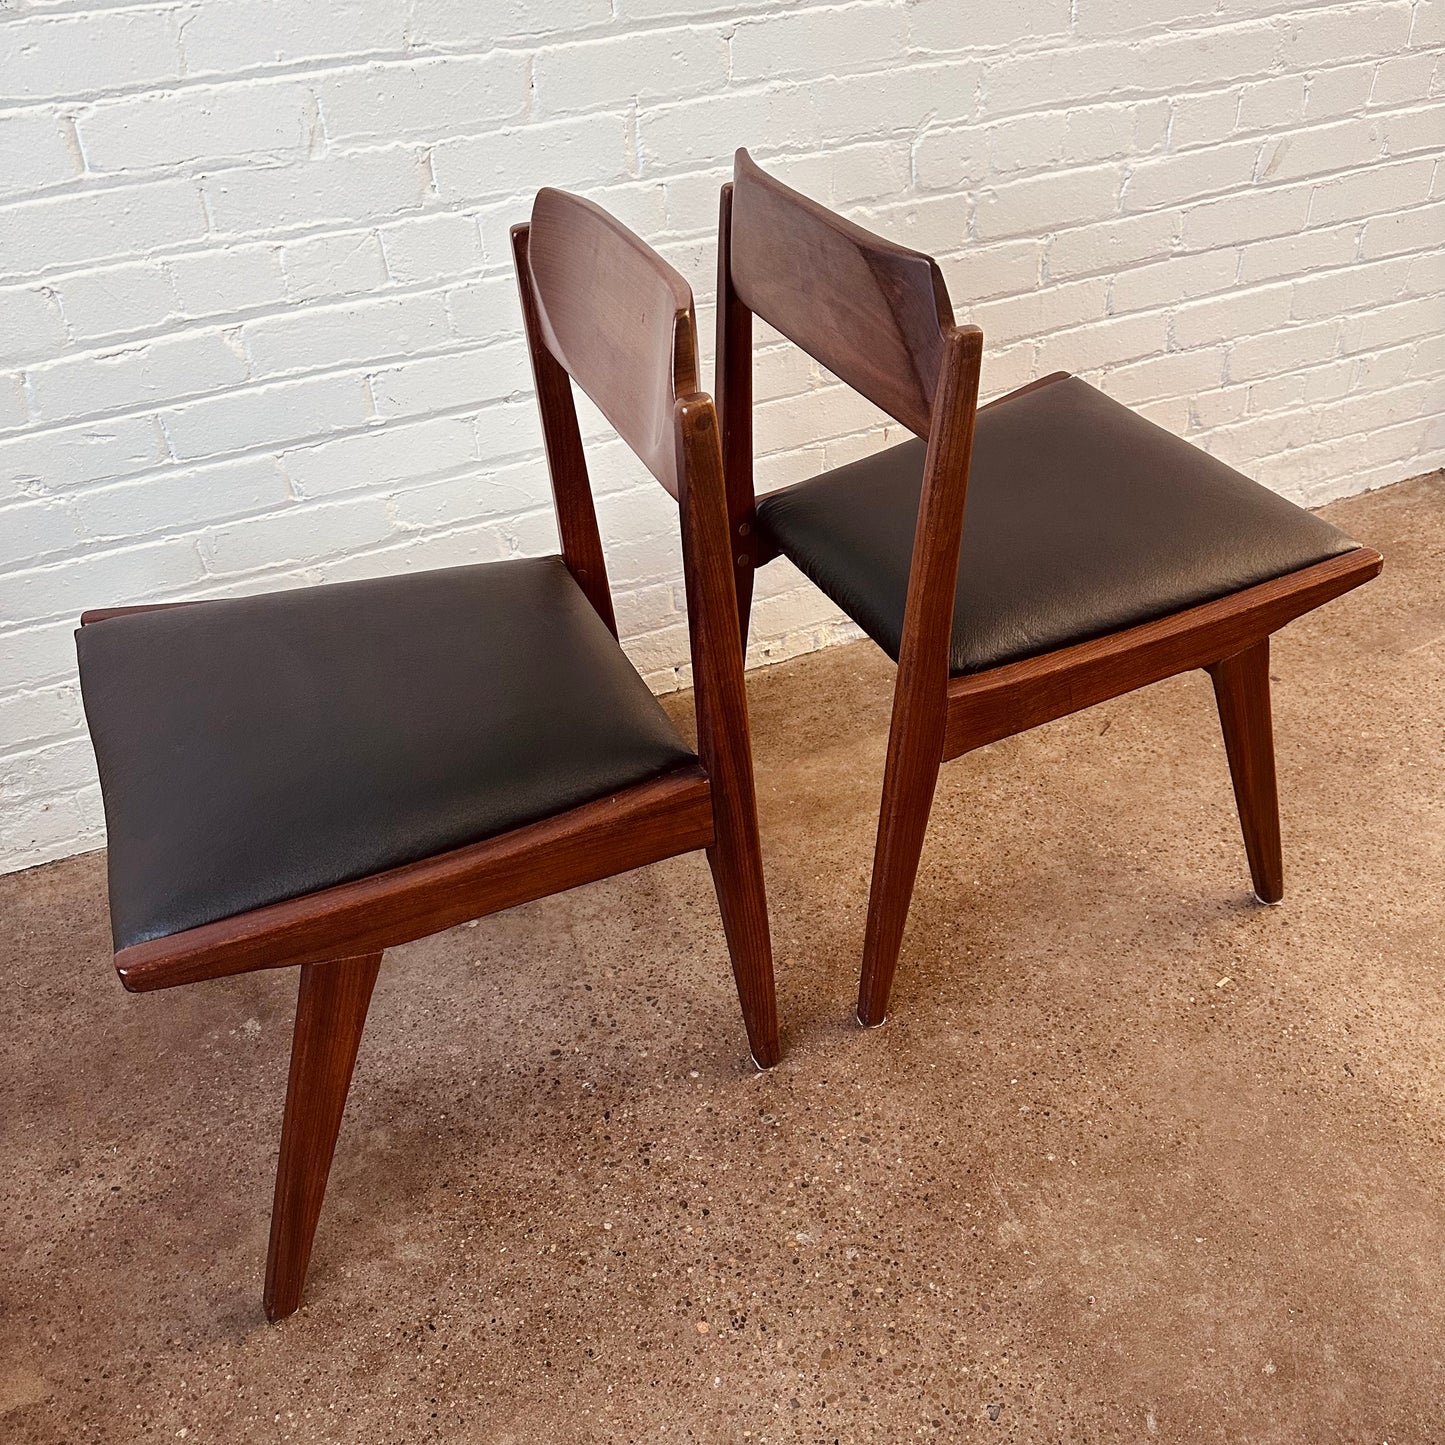 JAN KUYPERS SOLID WALNUT DINING CHAIRS - SET OF 4